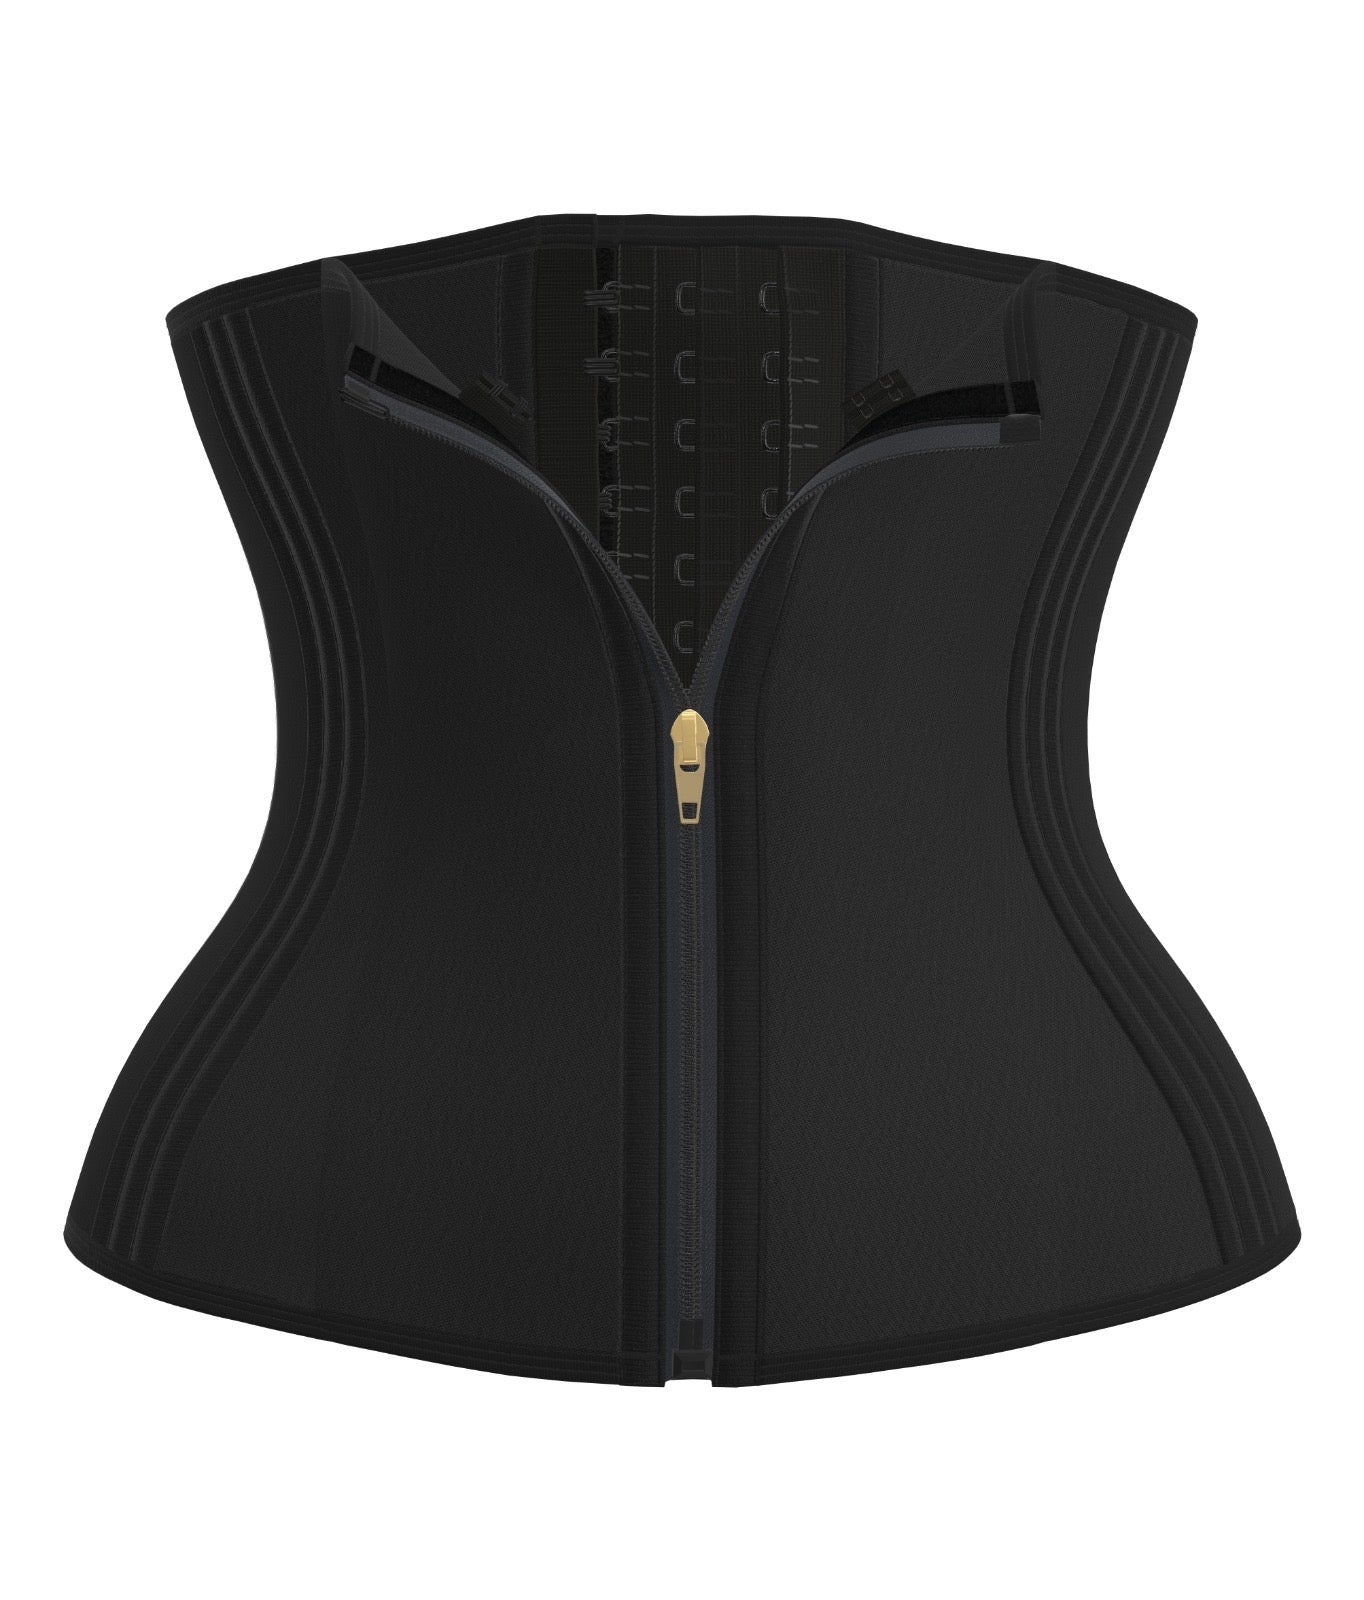 Extreme Waist Trainer with Zipper